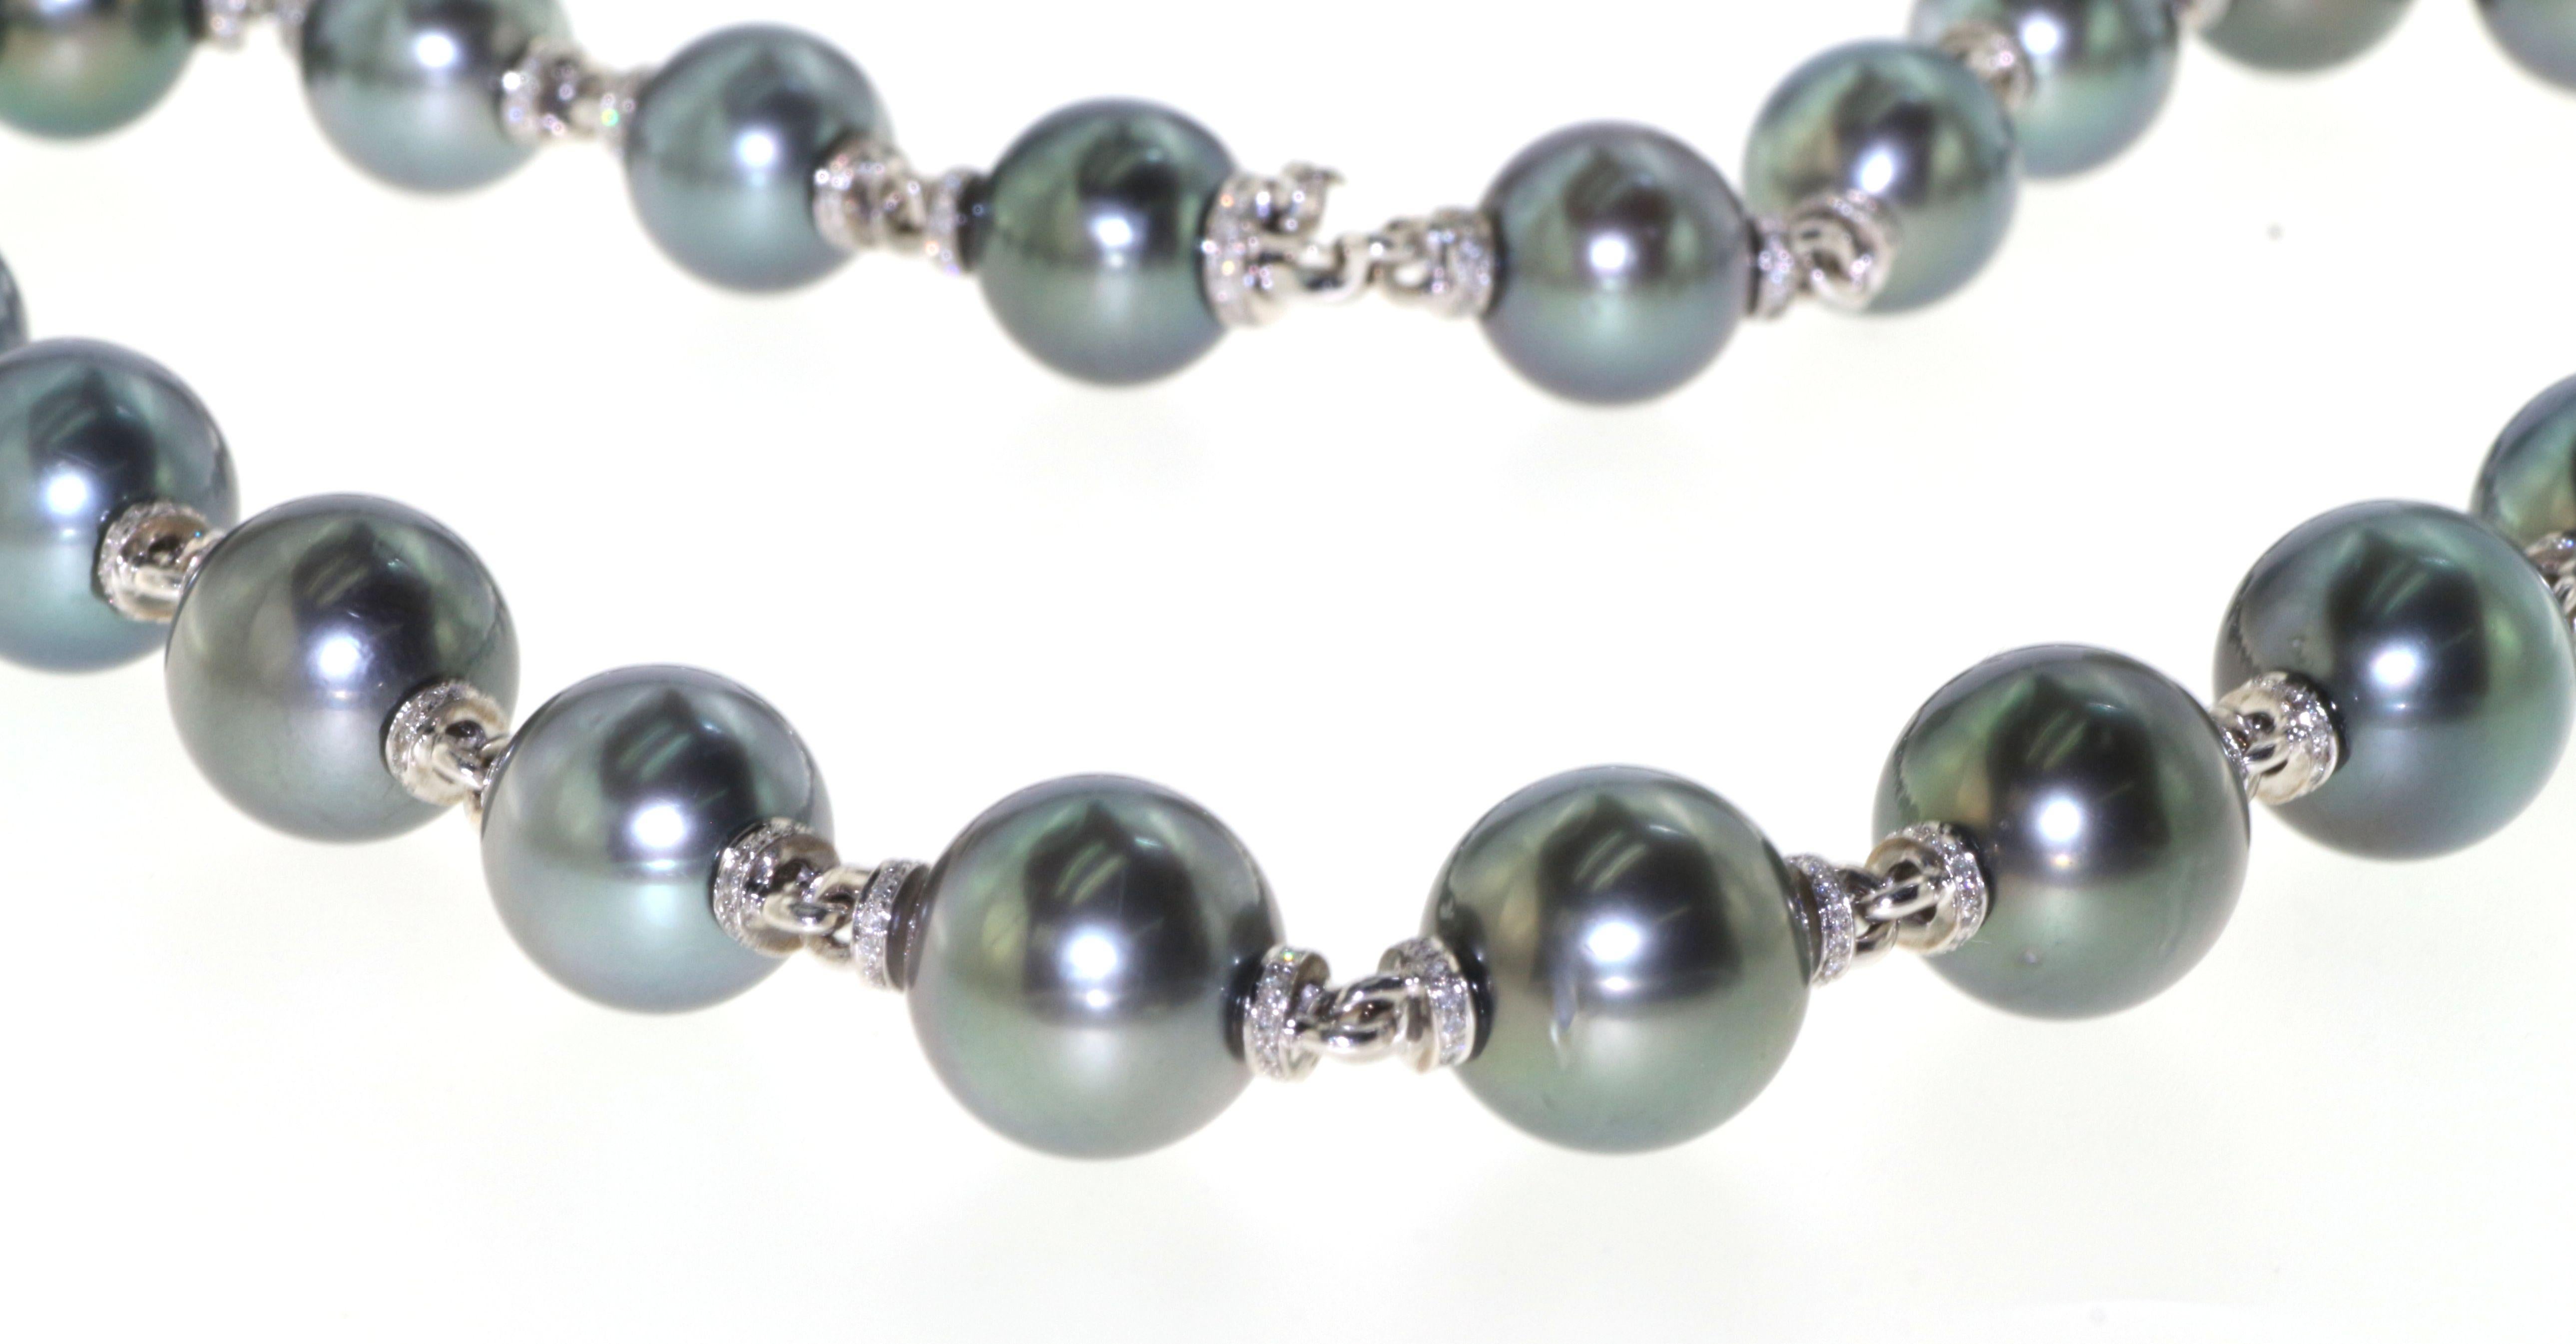 This unique custom made Large South Sea Tahitian 12.00-13.00 MM Pearl and diamond rondell necklace length is 16 inch. A great piece for your special someone. This Tahitian pearl necklace also have a matching bracelet, please visit our storefront and